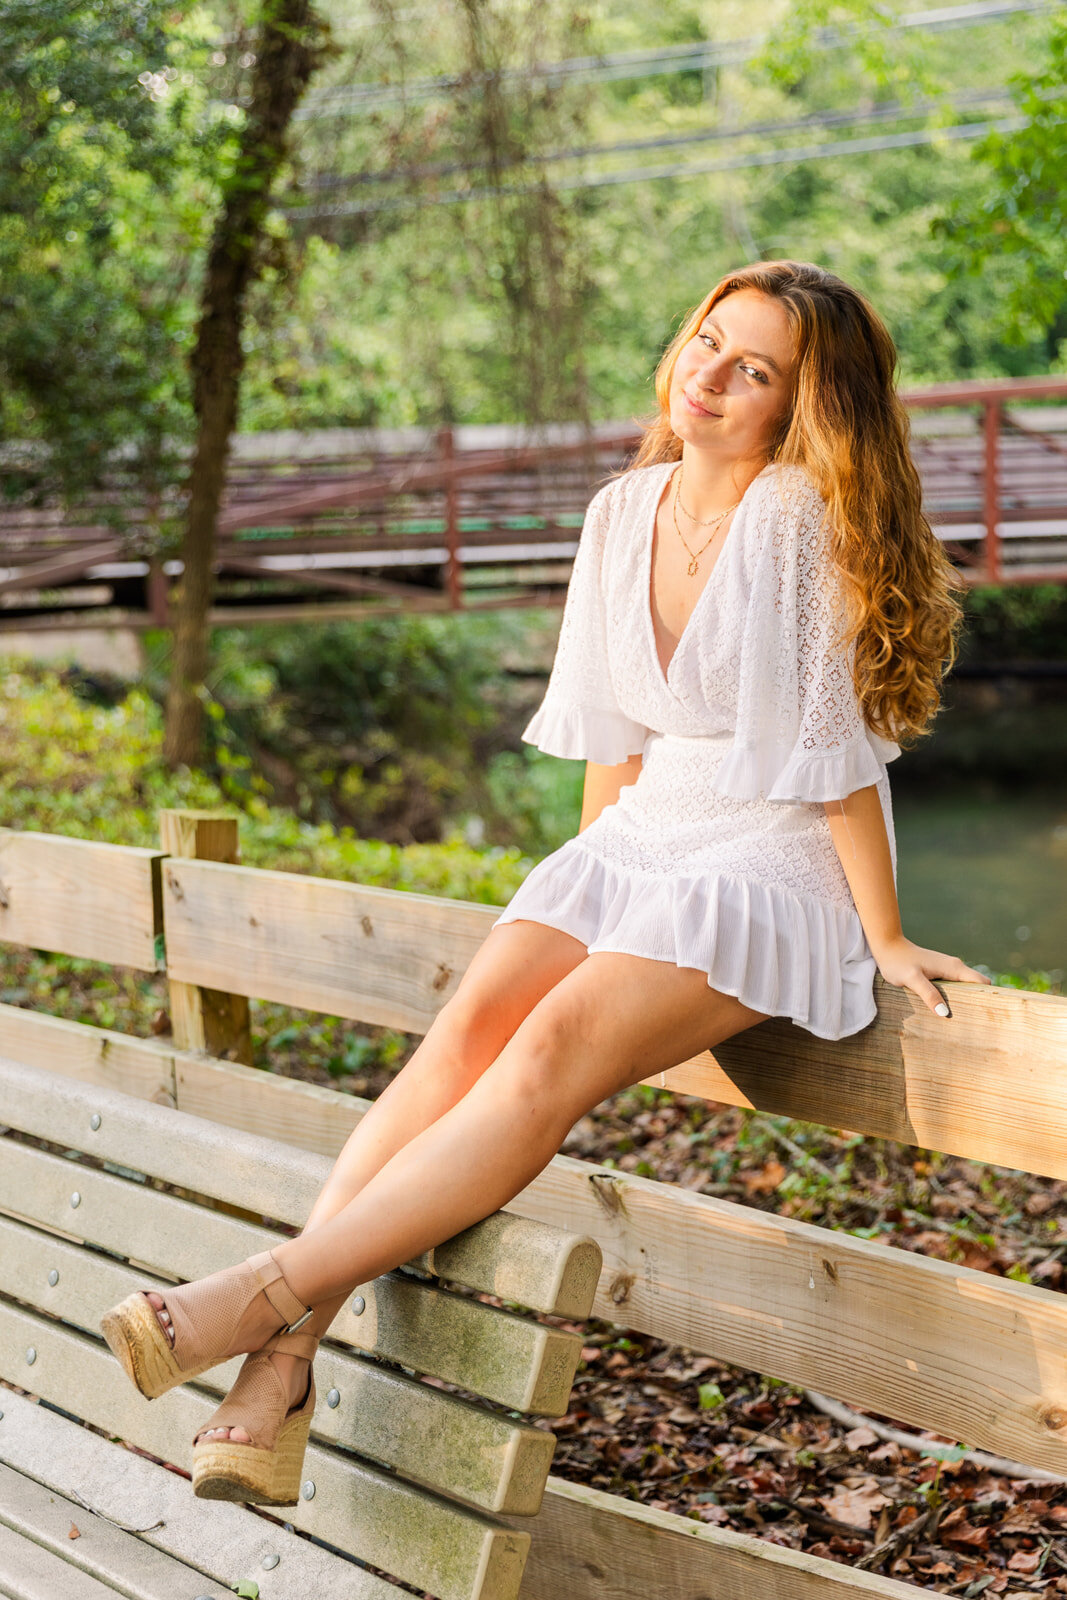 Atlanta outdoor summer high school girl sitting on a fence wearing white dress portraits Laure photography